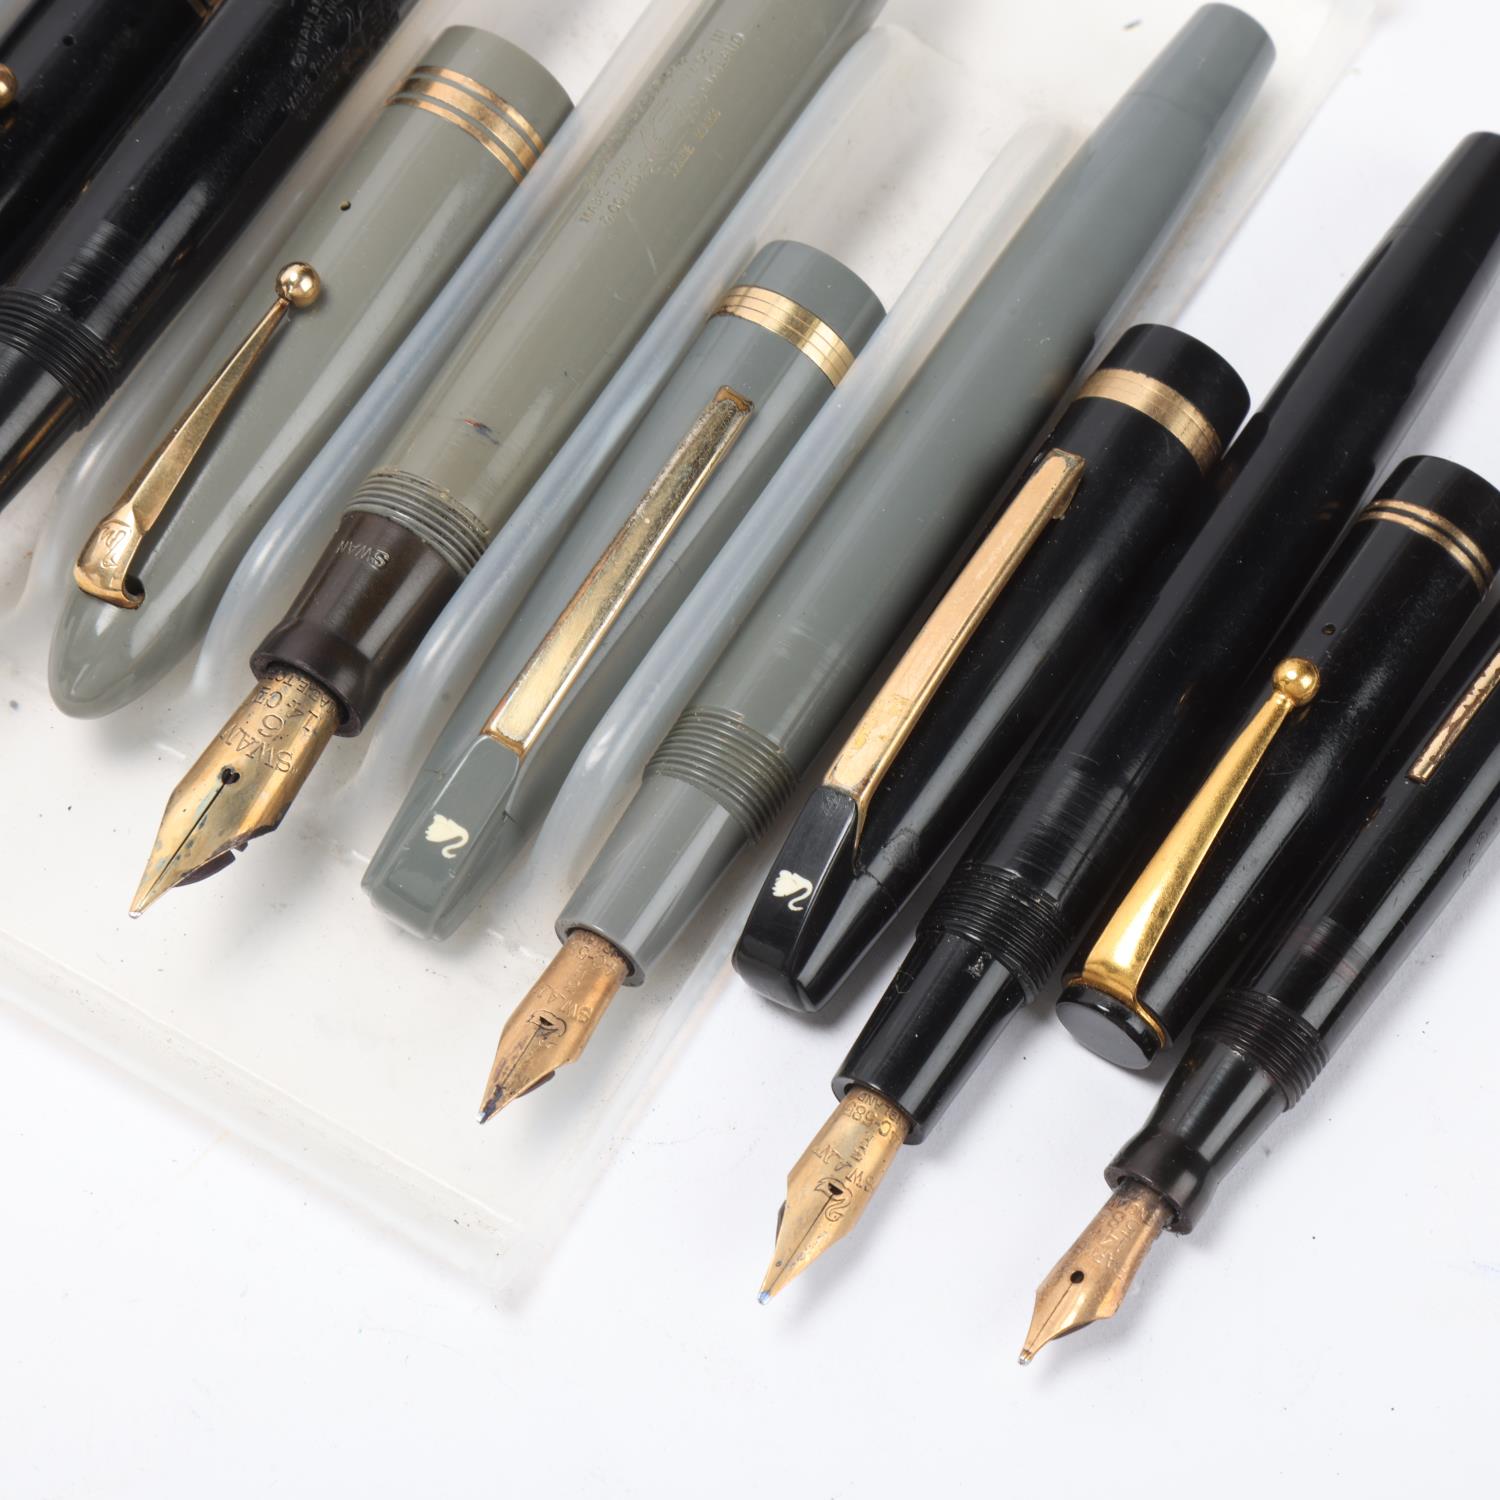 9 vintage Mabie, Tobb & Co / Sawn fountain pens, early/mid 20th century, models include, - Image 2 of 4